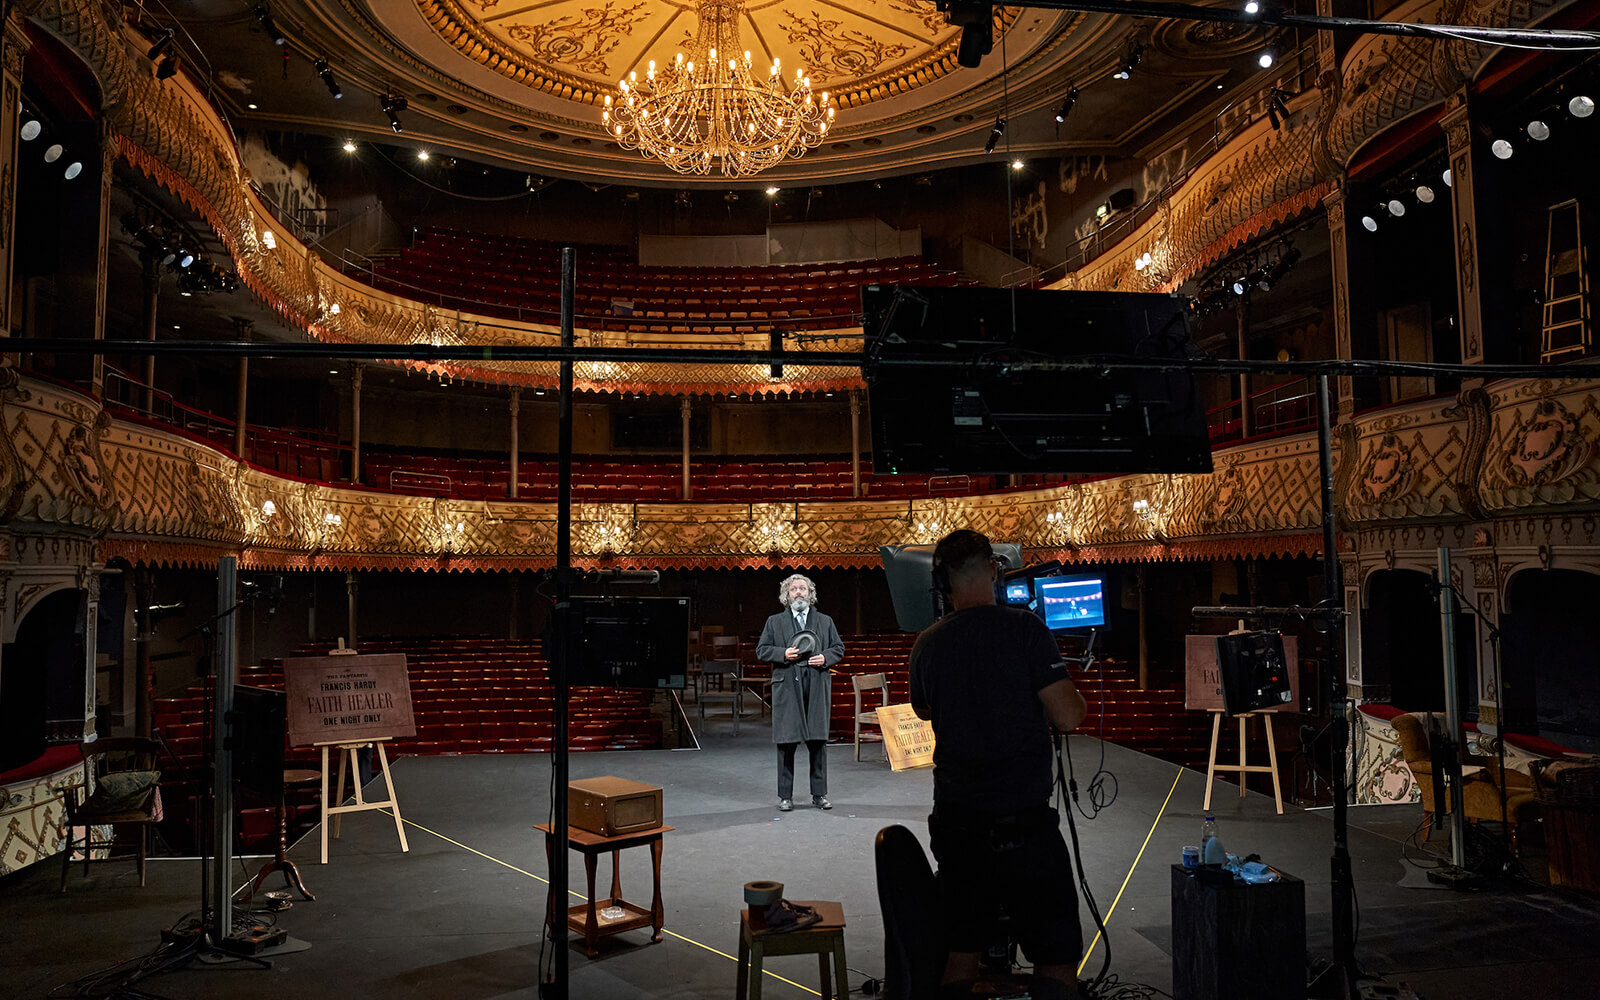 During the COVID-19 pandemic Bloomberg stepped up support for the arts in London though the London Community Response Fund, like at The Old Vic. photo credit: Manuel Harlan